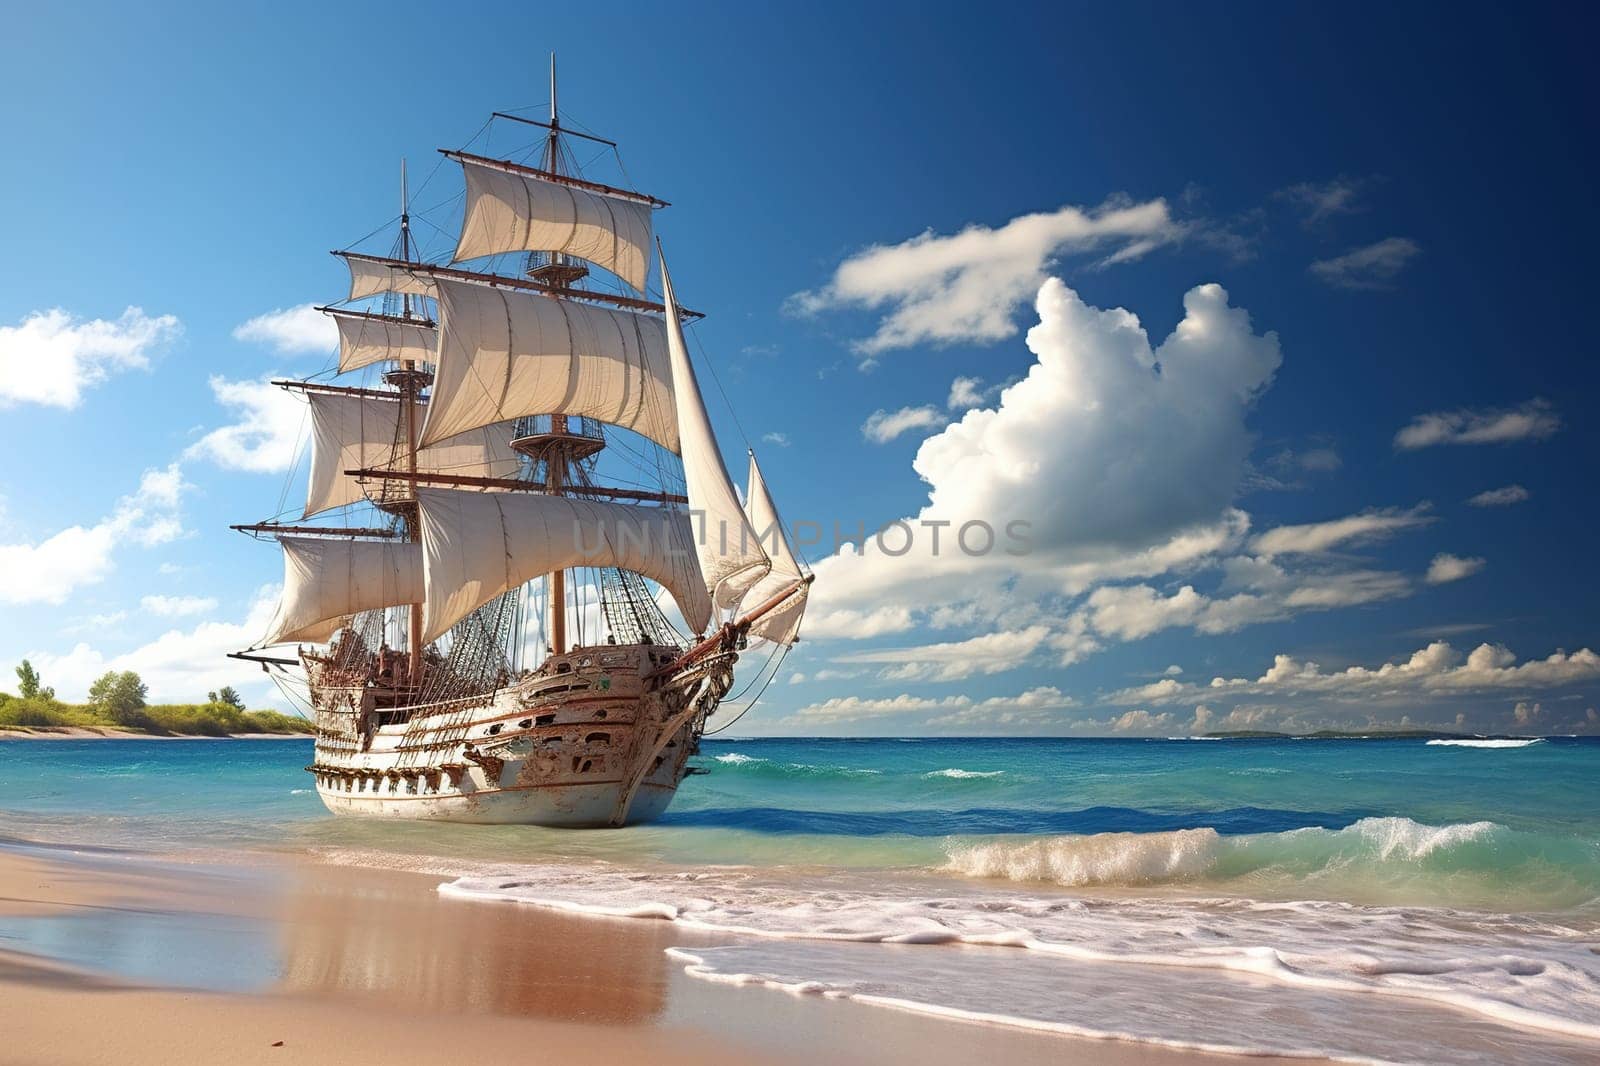 A large wooden ship with white sails off the coast during the day.